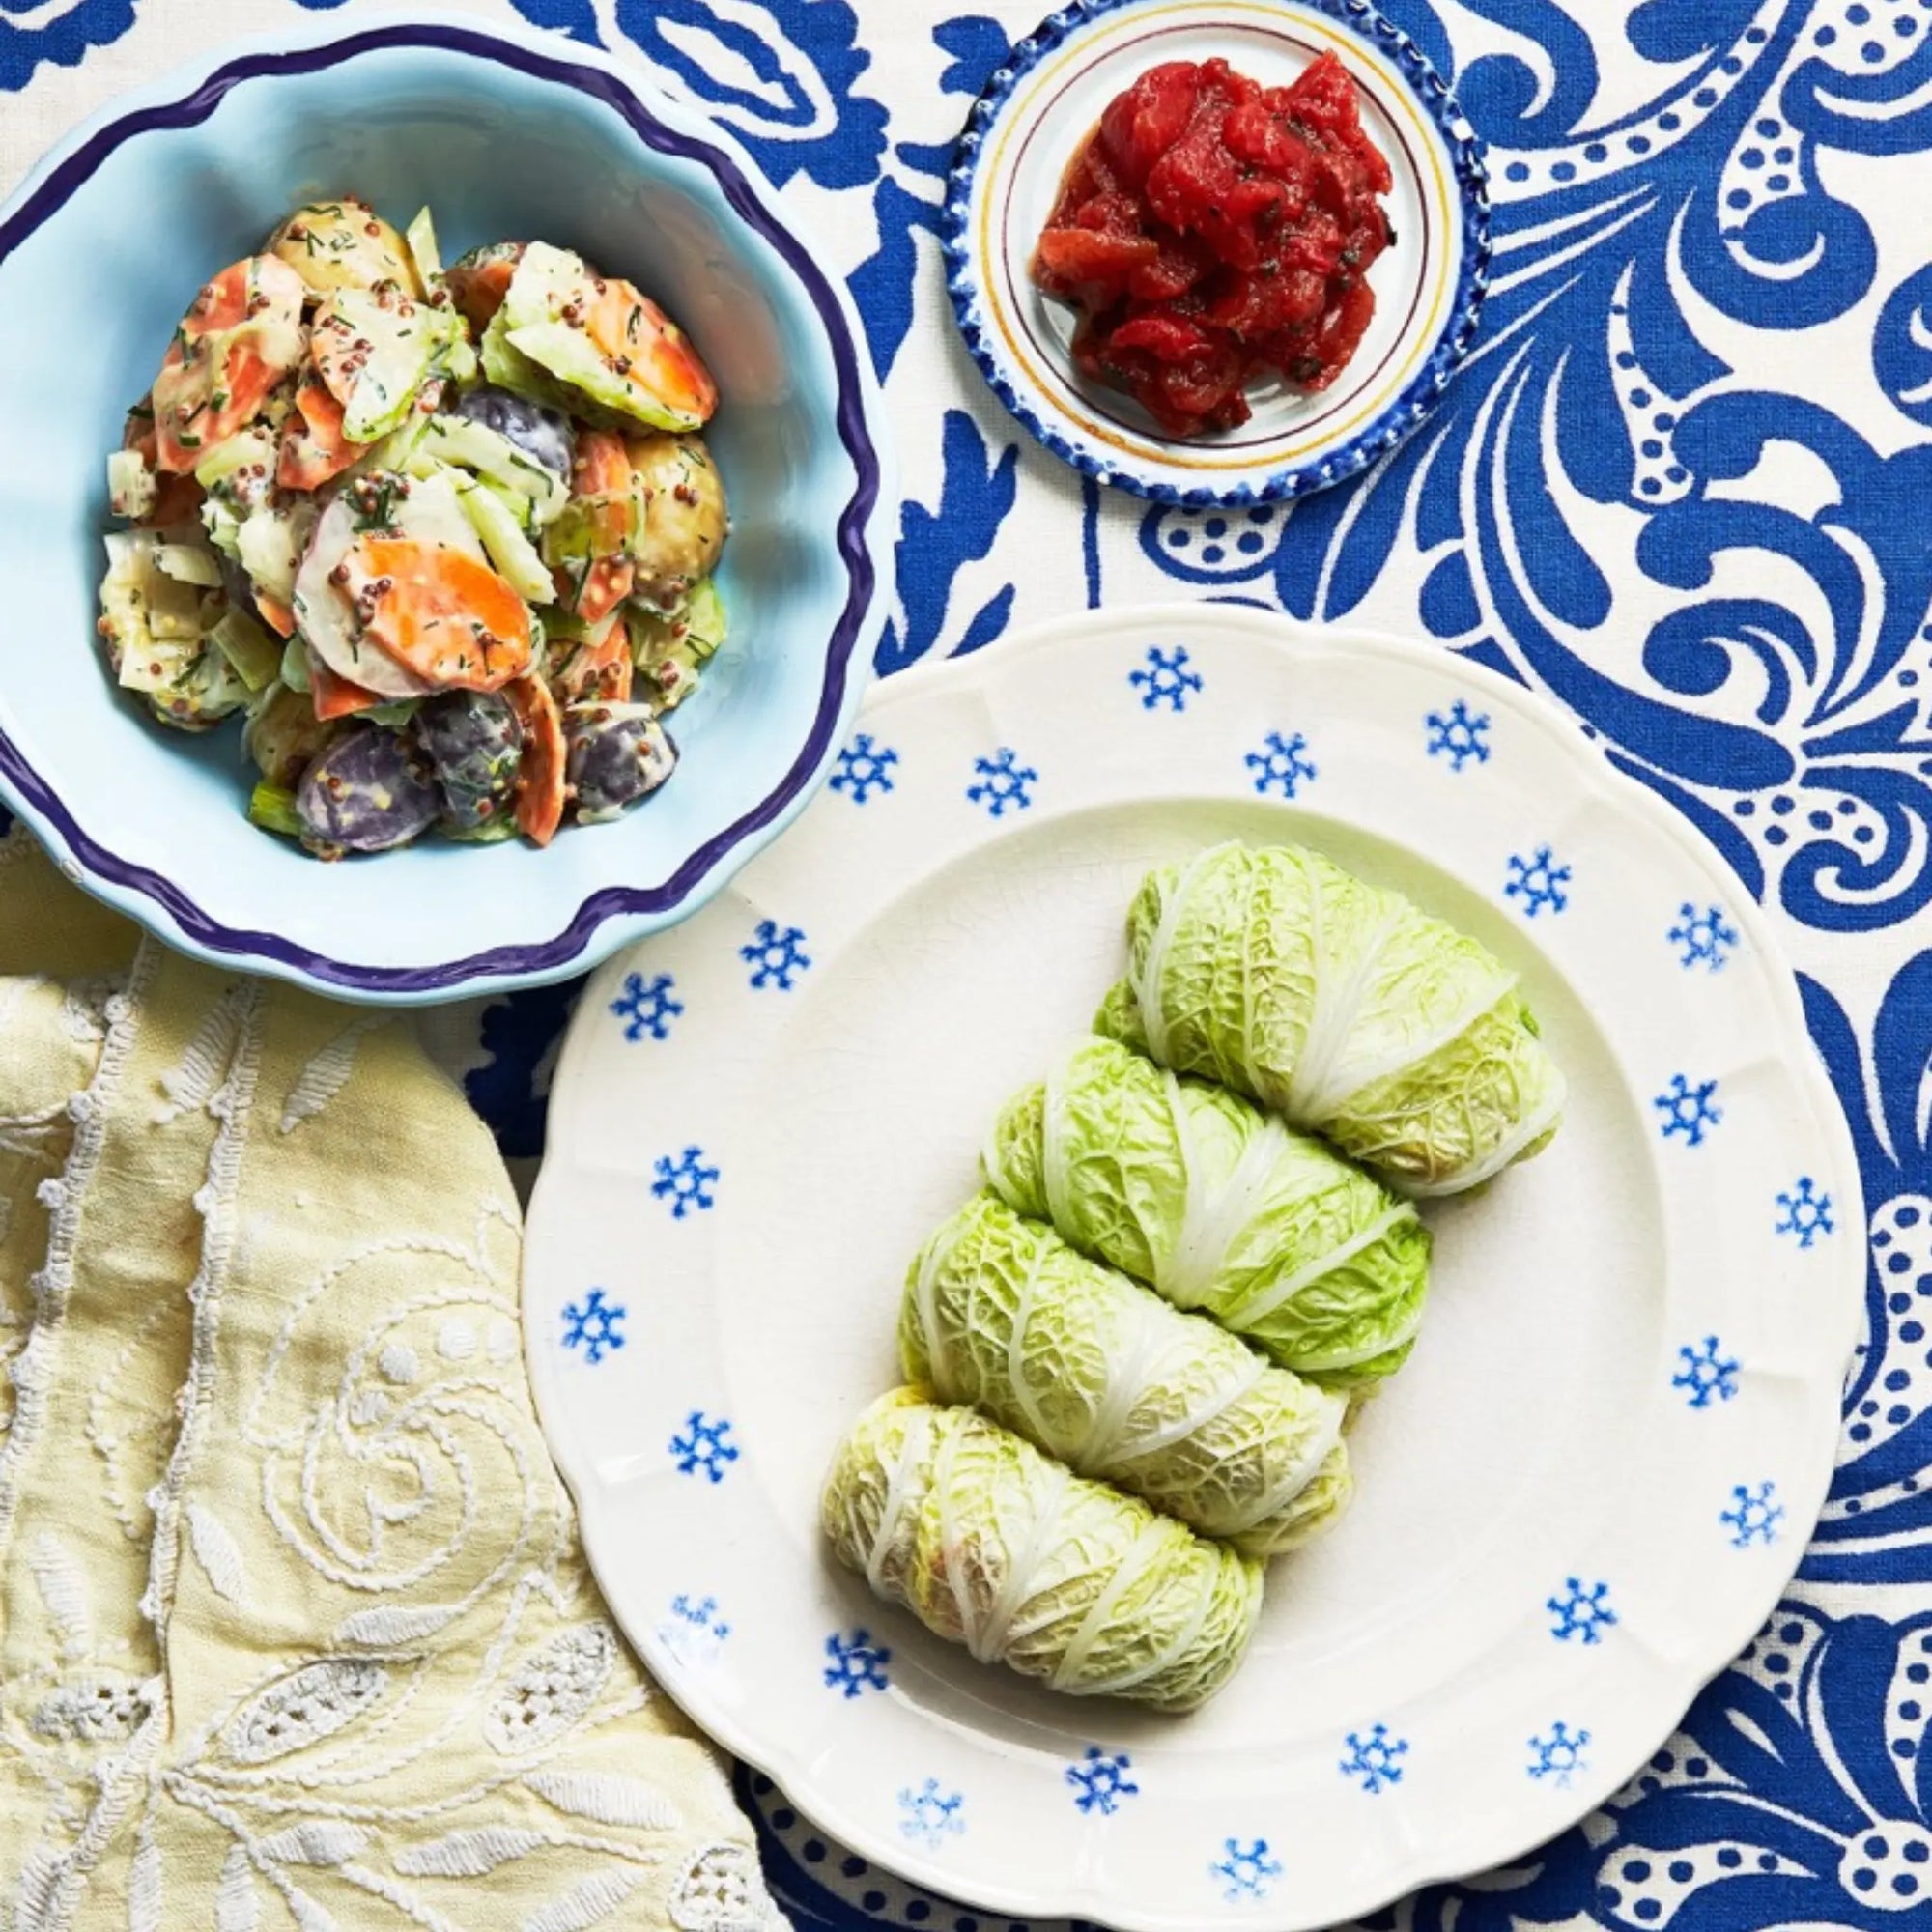 A plate of stuffed cabbage rolls on a tablecloth for upcoming menu provided by Laroot World, an organic, local, gluten free New York City flexitarian, pescatarian, carnitarian, vegan, and vegetarian meal delivery service 